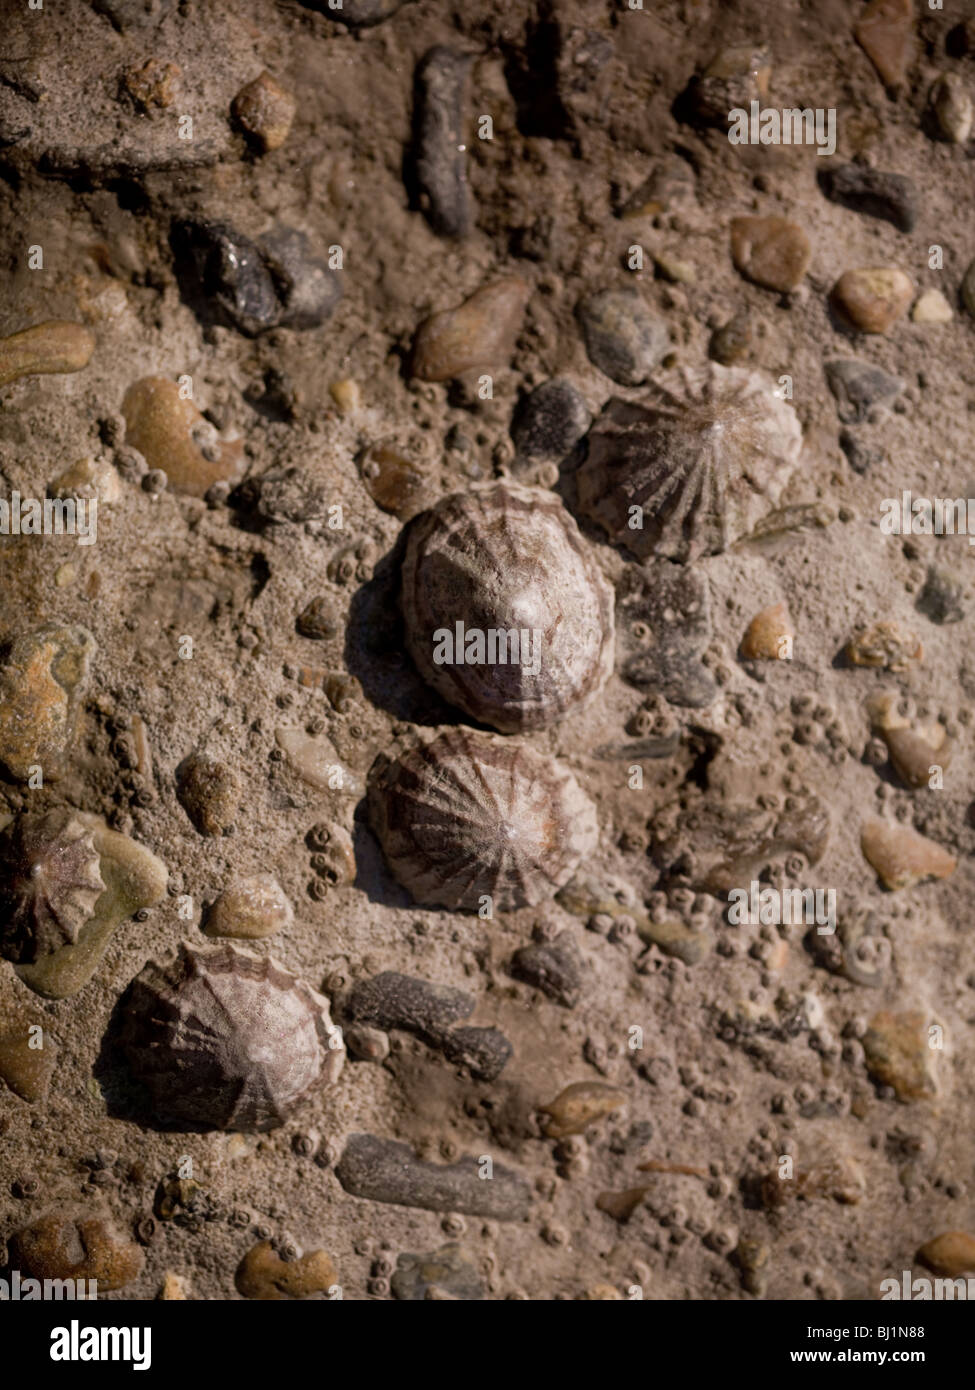 Limpets. Stock Photo